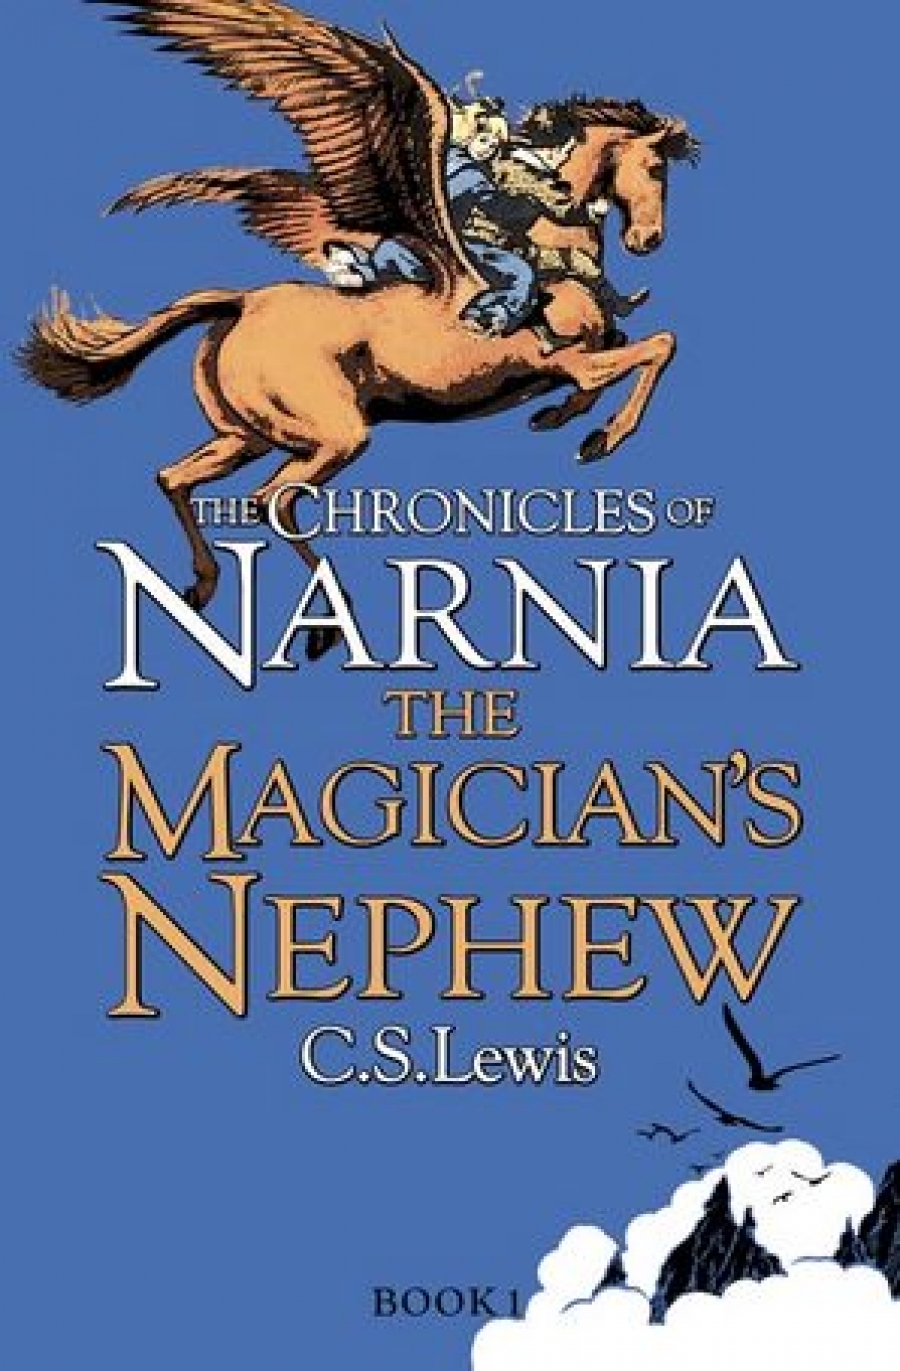 Lewis C. S. Lewis C. S. The Chronicles of Narnia 1. The Magician's Nephew 